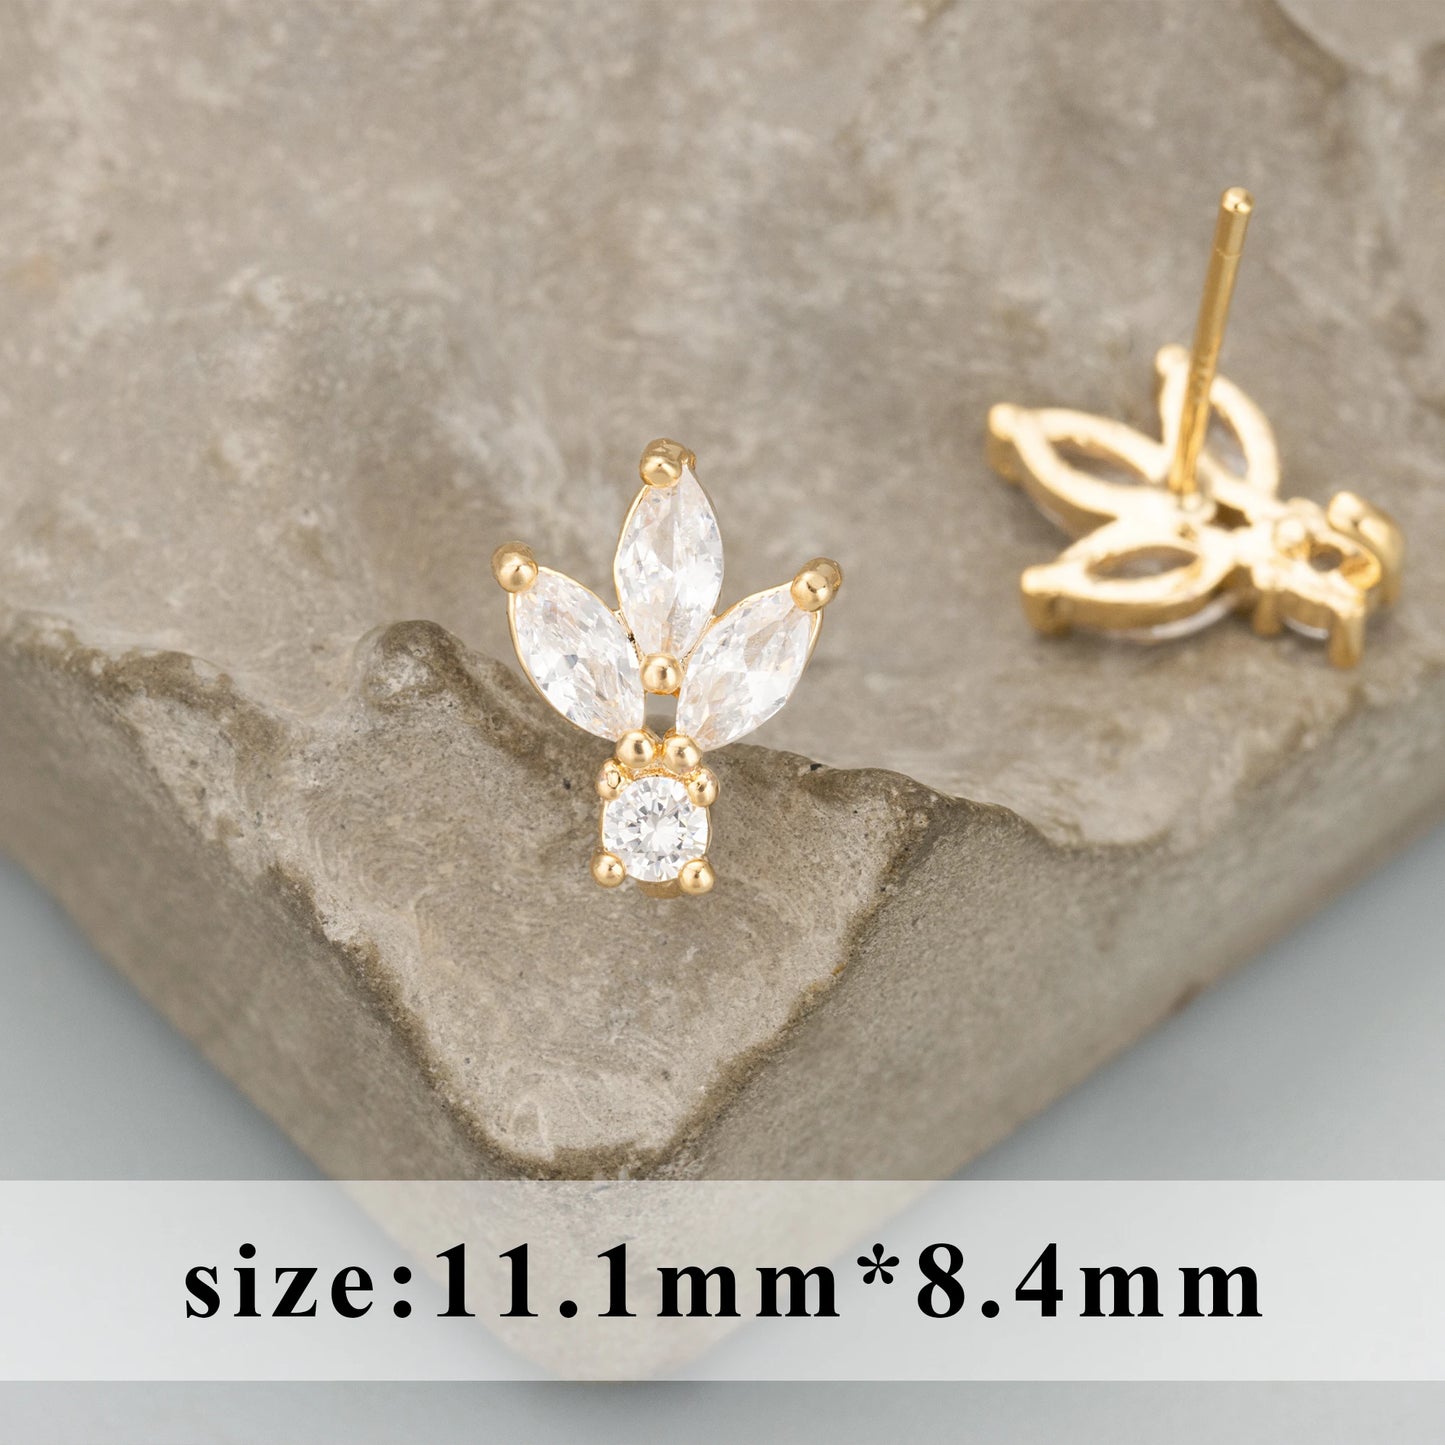 GUFEATHER MD94,jewelry accessories,18k gold rhodium plated,copper,zircons,hand made,charms,jewelry making,diy earrings,6pcs/lot